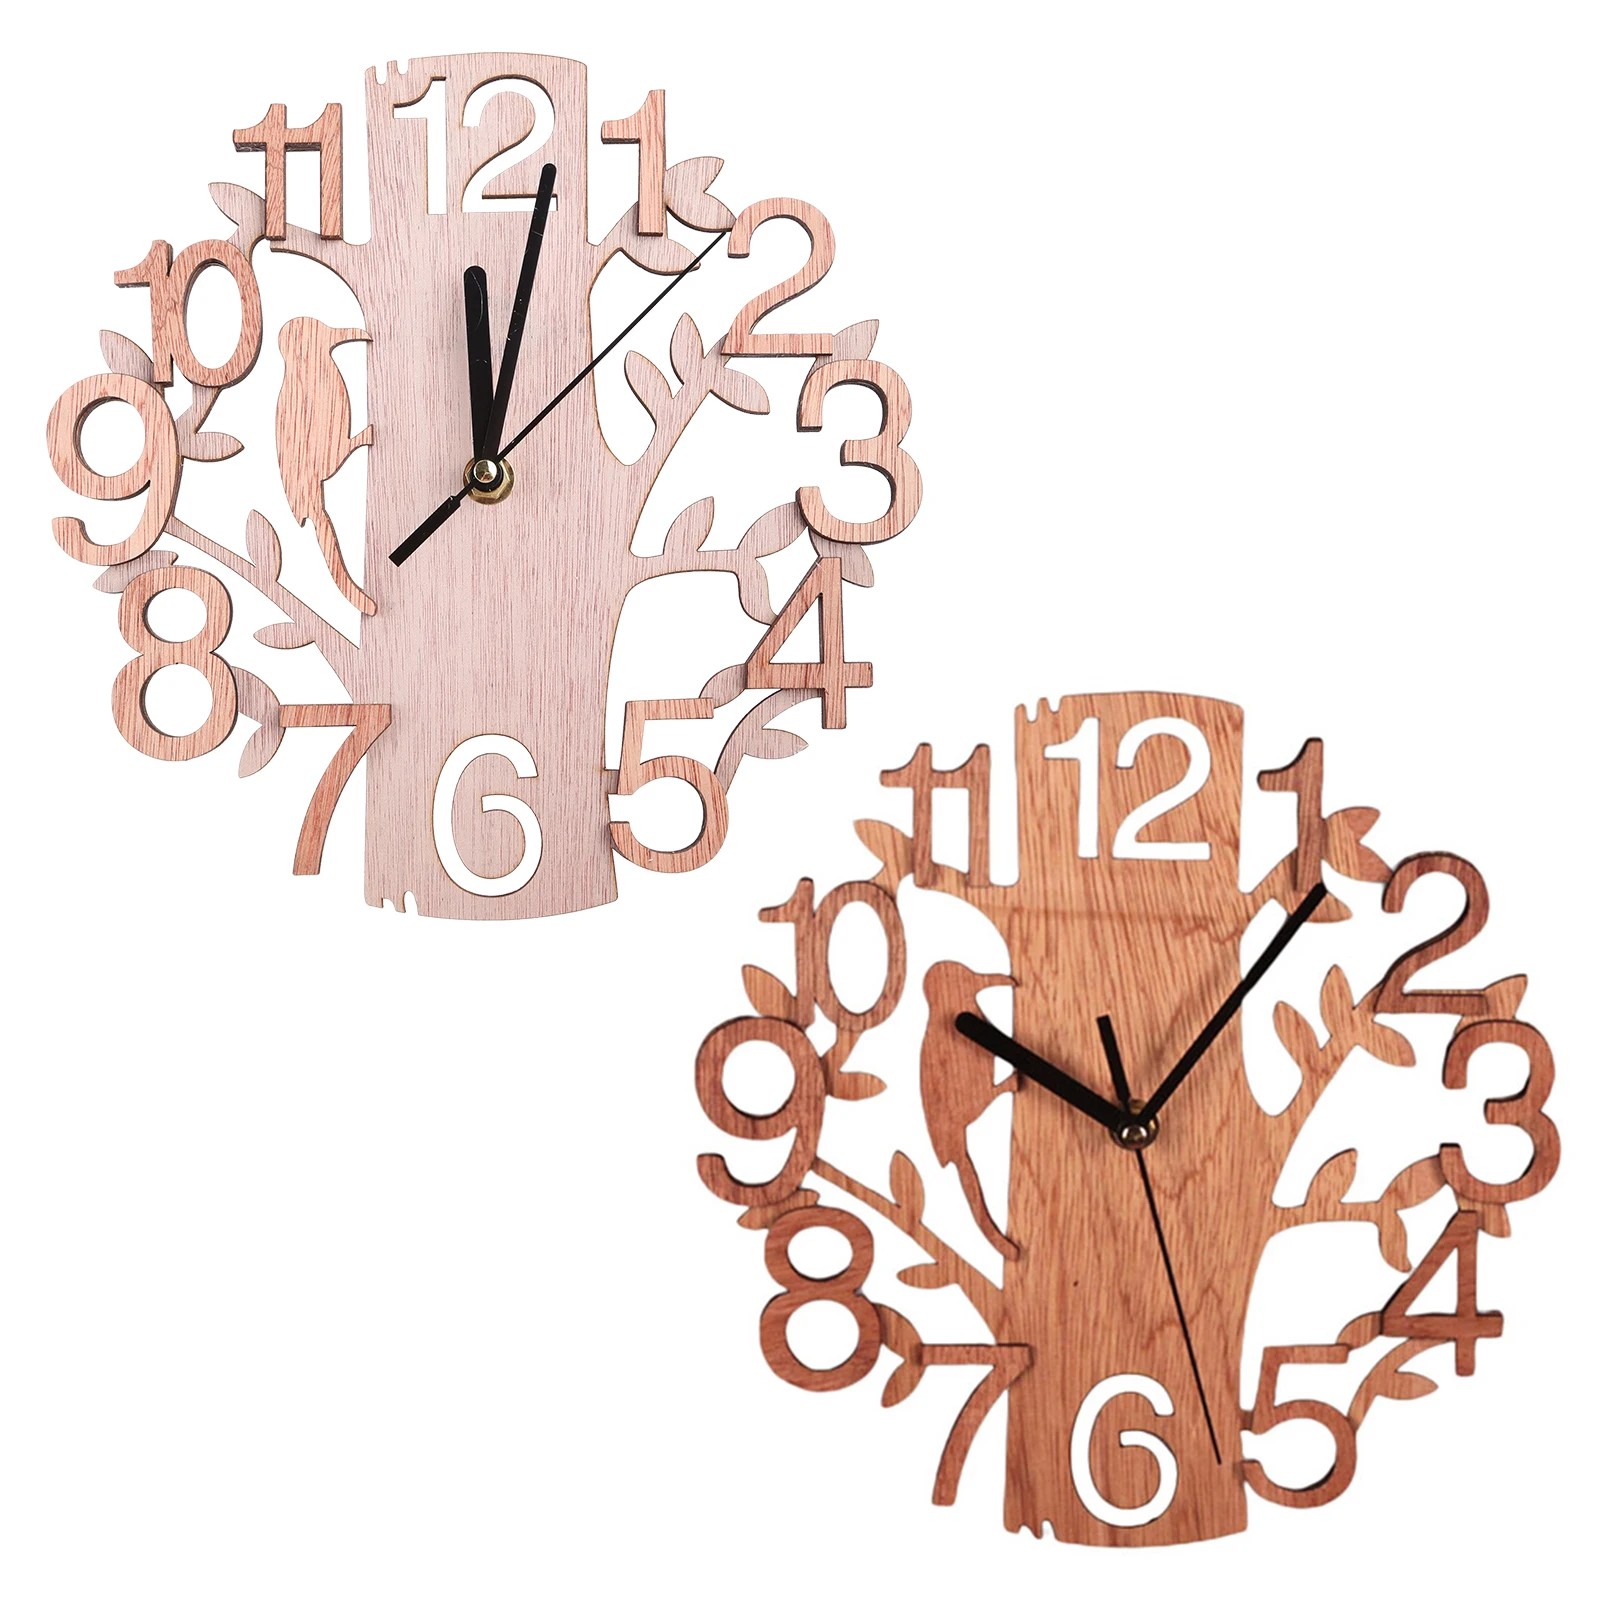 23cm 3D Tree Shaped Bird Wall Clock Hanging Vintage Decorative Watch Round Wooden for Home Office Kitchen Bedroom Gift Dropship